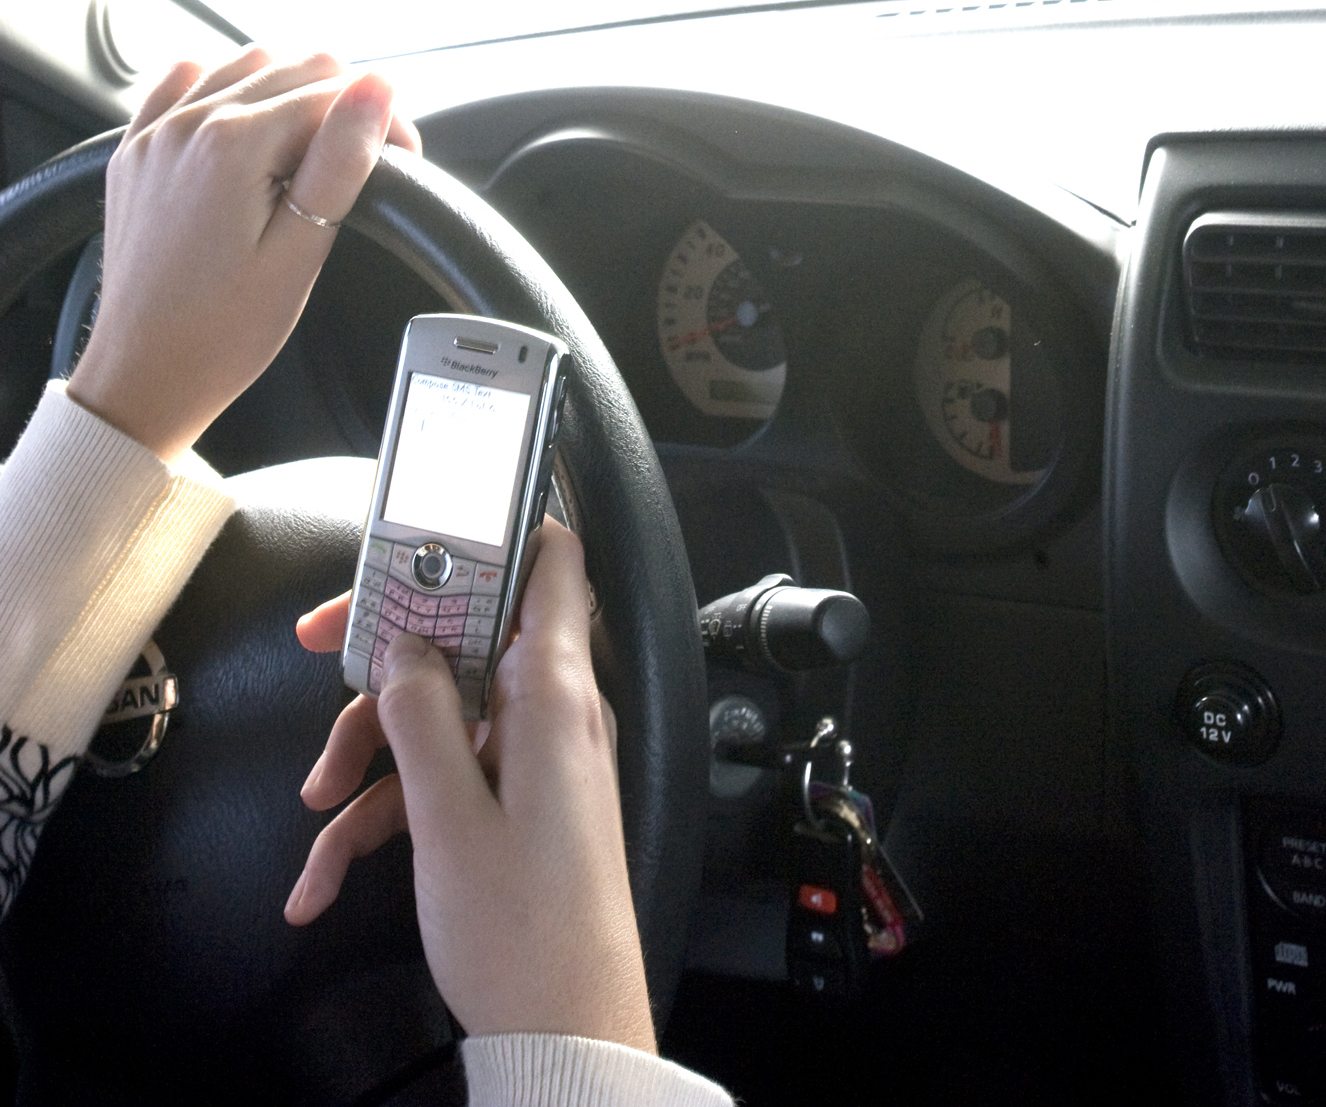 A team of scientists has created a mathematical equation to track texting patterns that can detect when a person is texting while driving.